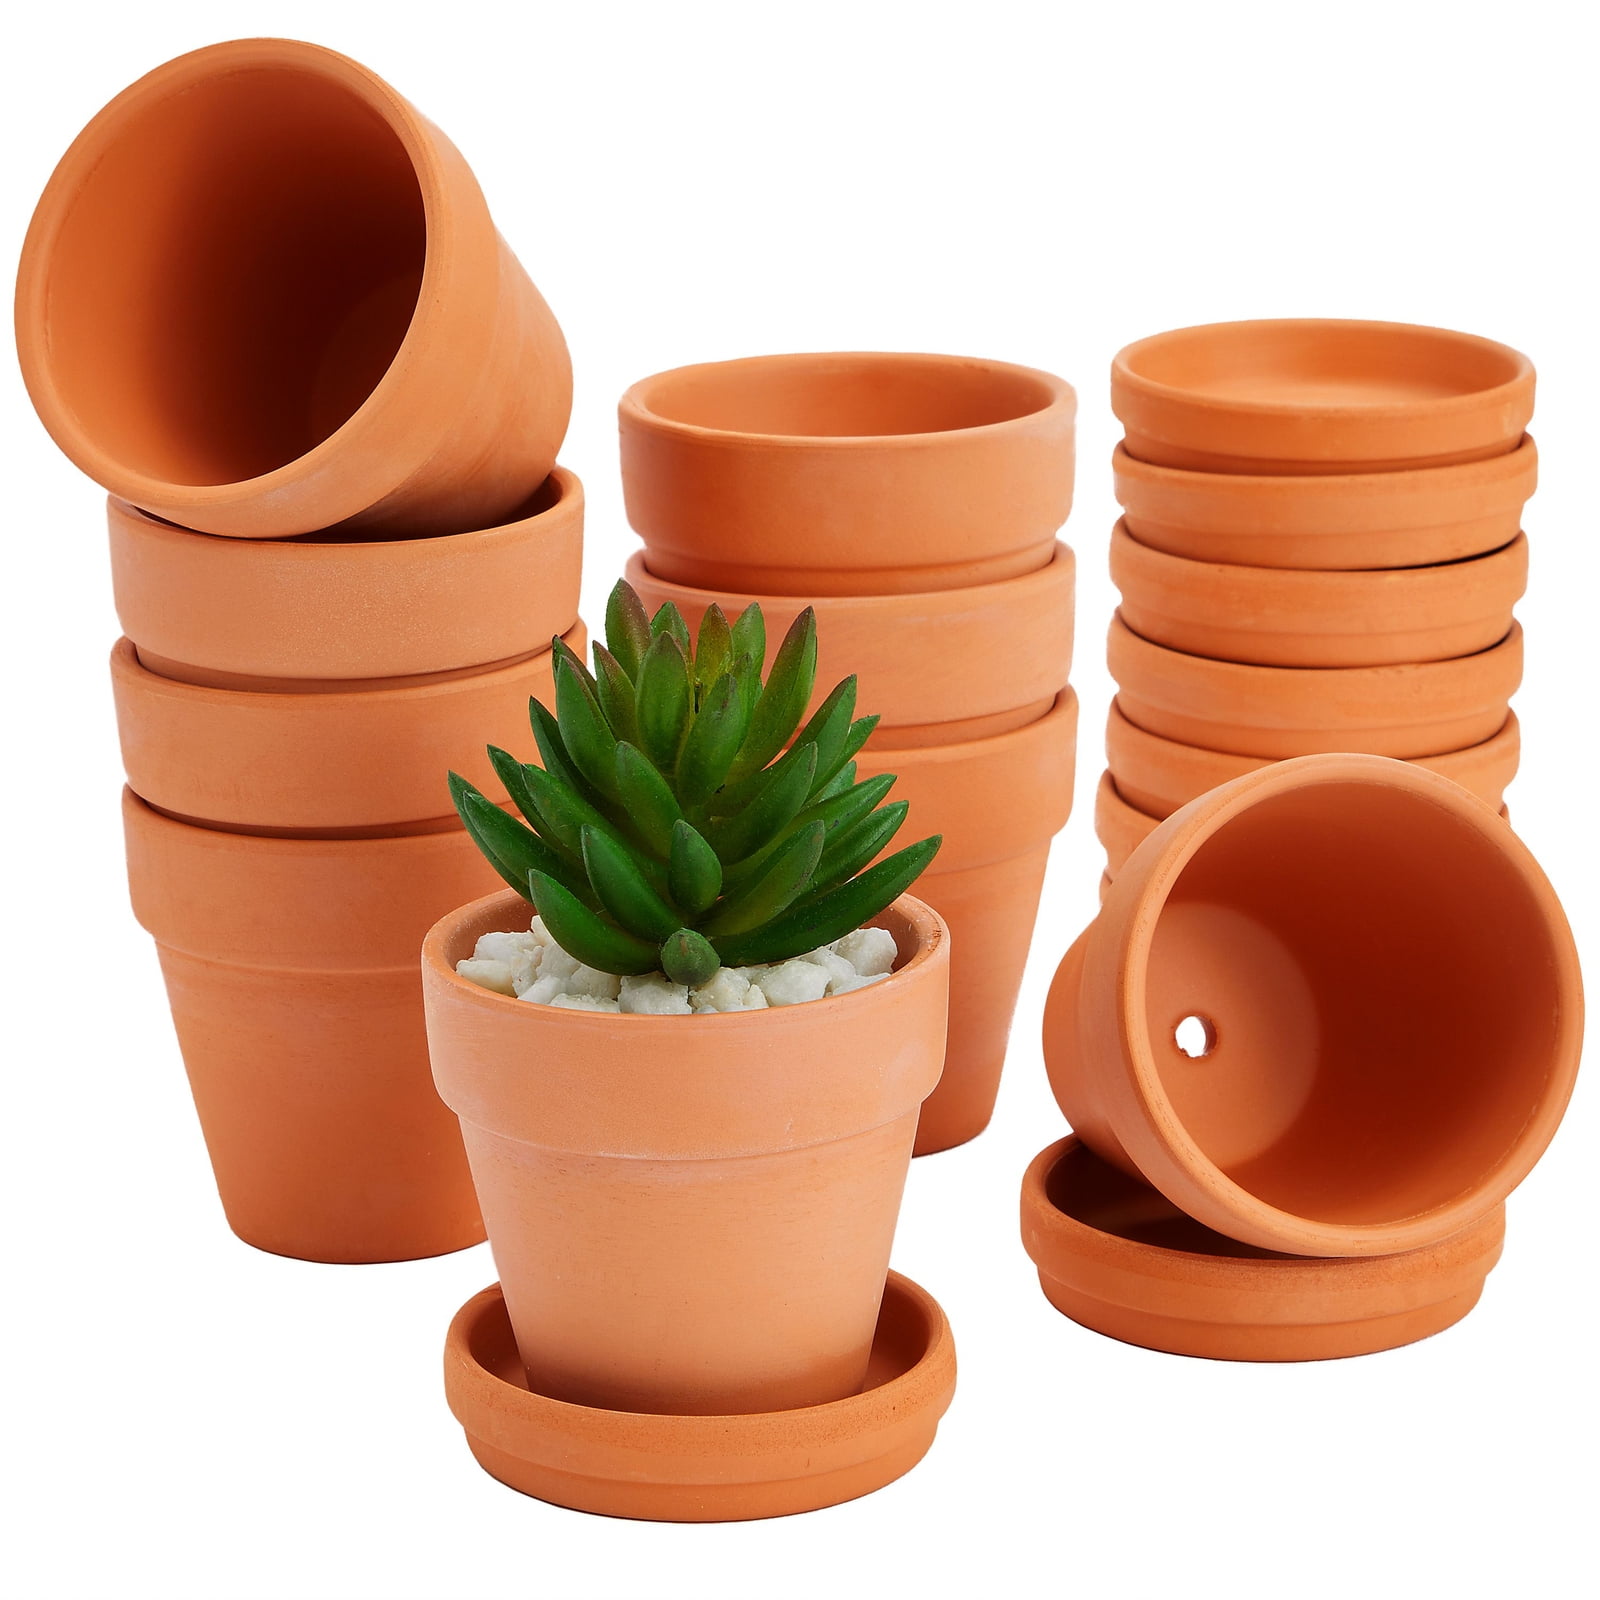 16 Pack 2 Inch Terracotta Pots with Saucer for Drainage, Clay Planters for  Flowers, Indoor Succulents, Crafts, Cactus, 2 x  In 